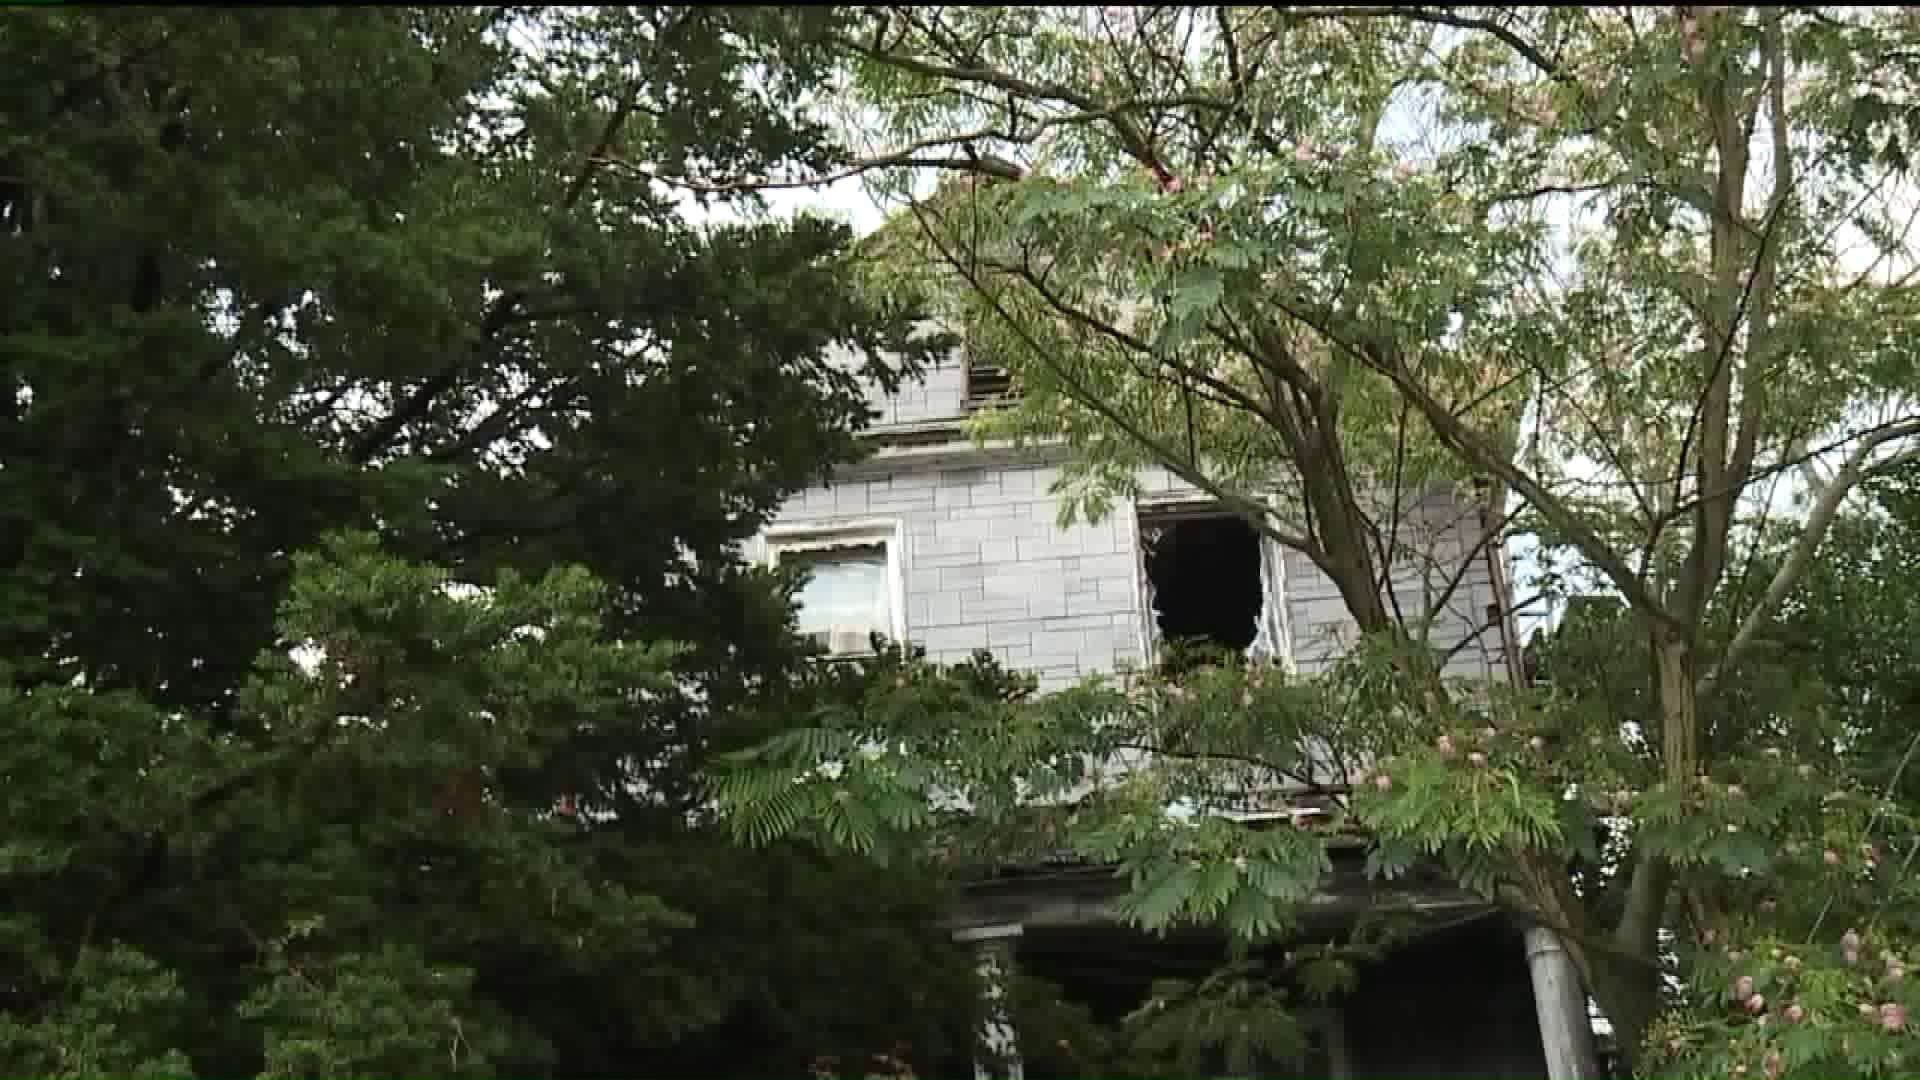 House Struck by Lightning in Luzerne County